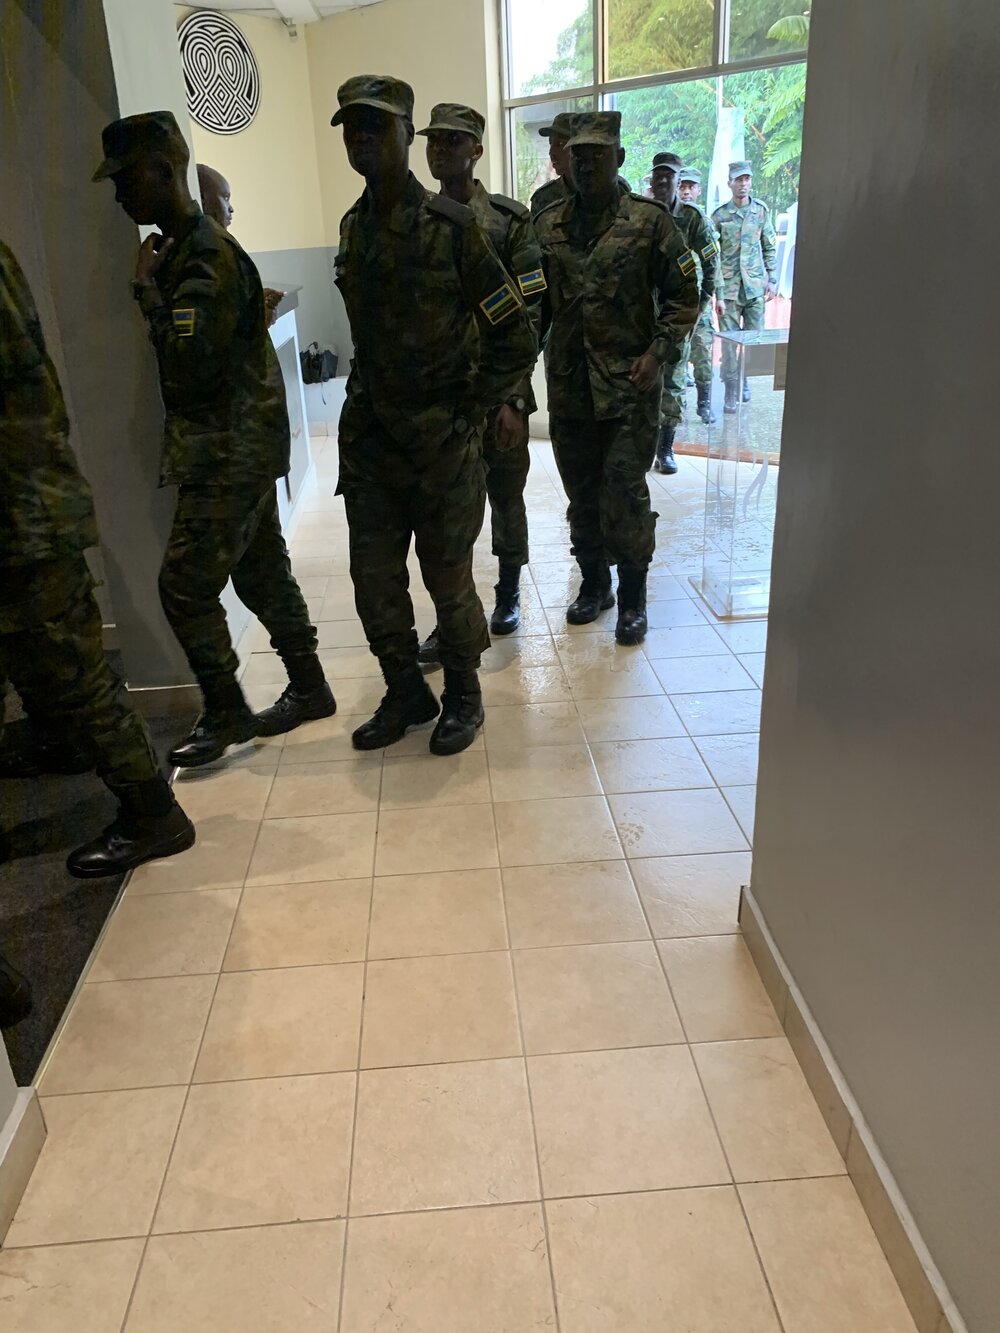 We were surprised to see a steady line of Rwandan soldiers coming through the exhibit in big groups.